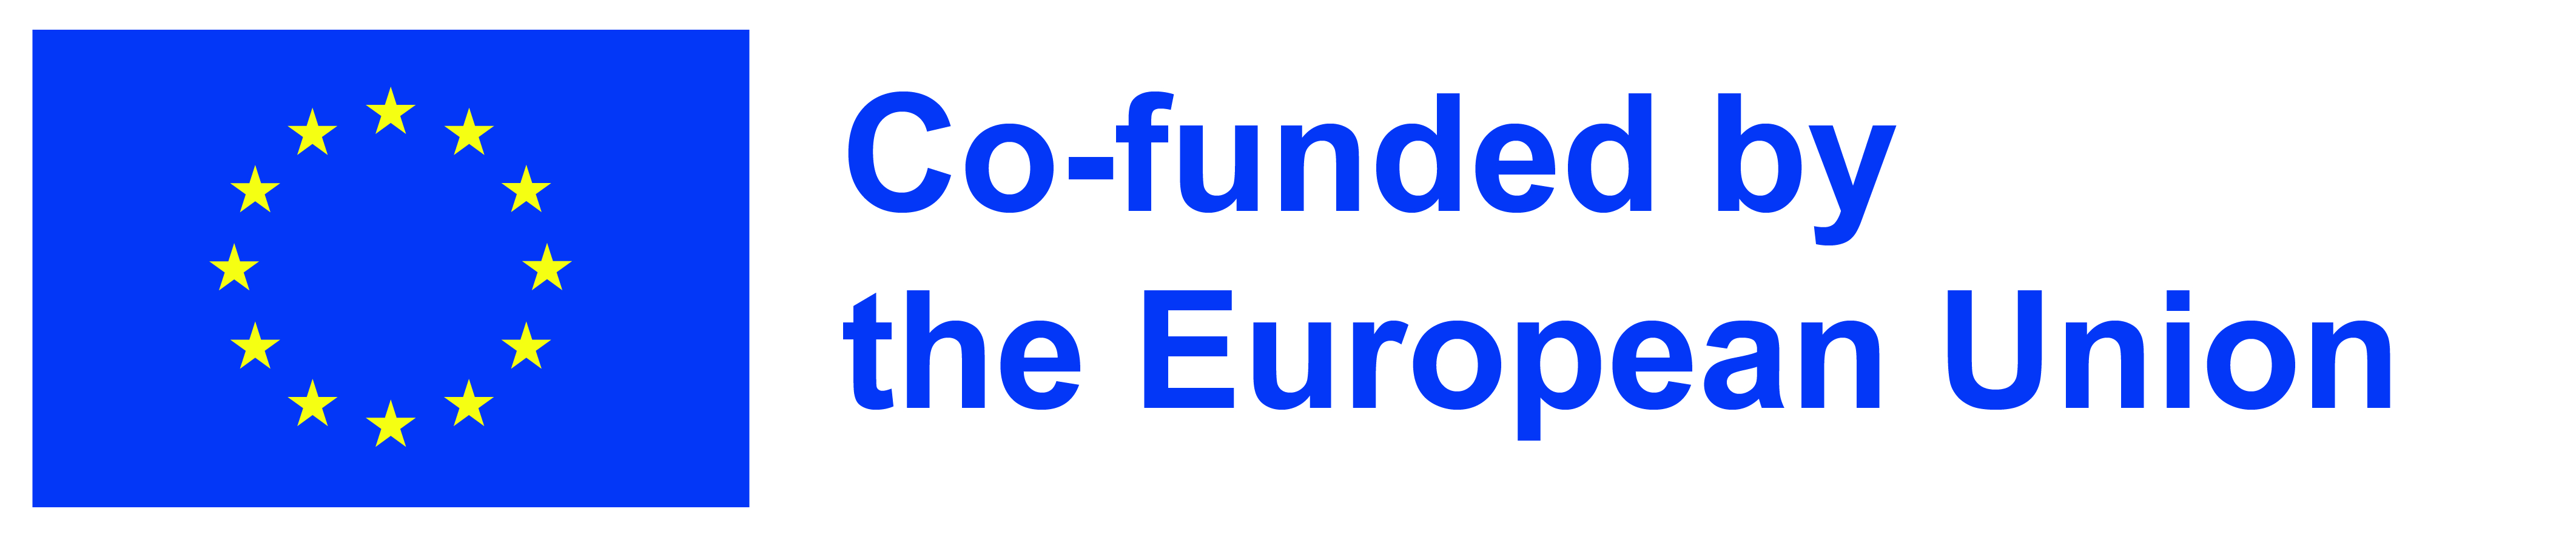 European union logo and a text: Co-funded by the European Union